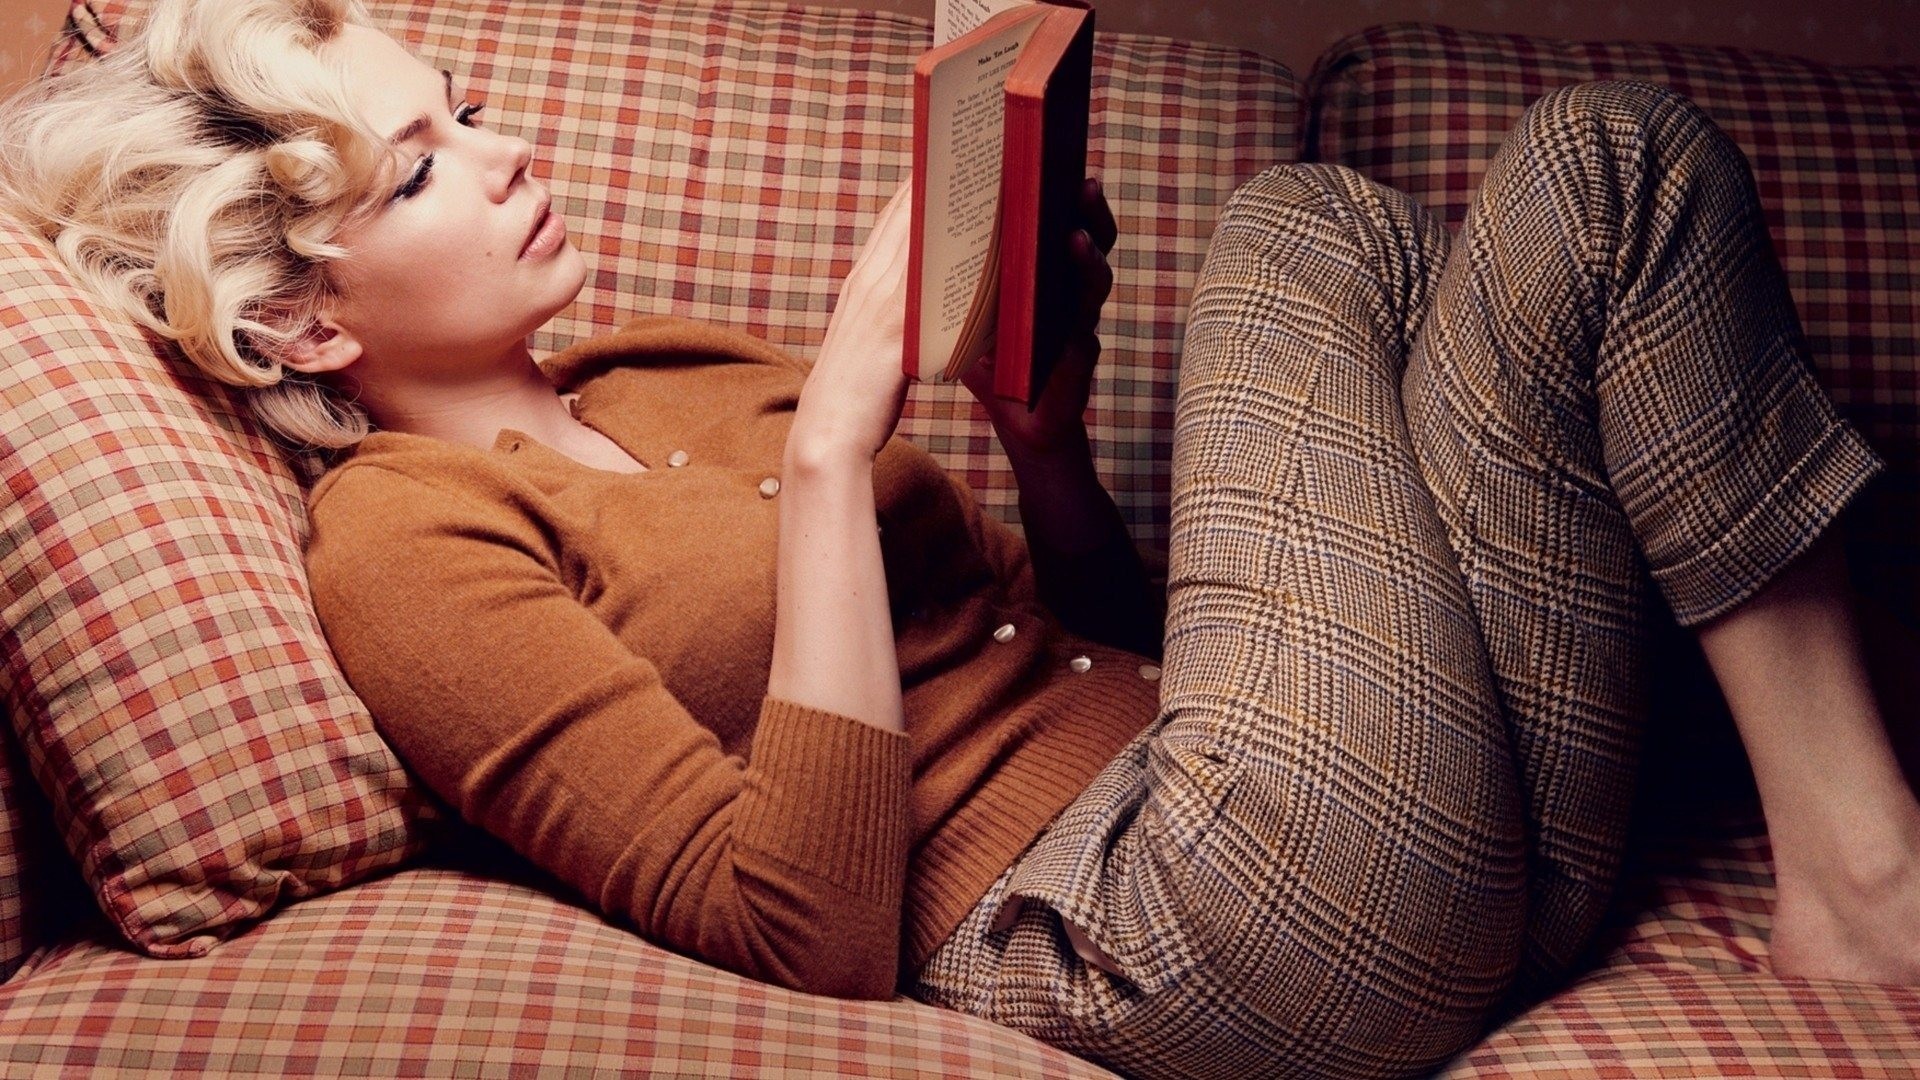 Michelle Williams Lying Down Books Couch Sweater Curly Hair Blonde Women Pants Women Indoors Reading 1920x1080